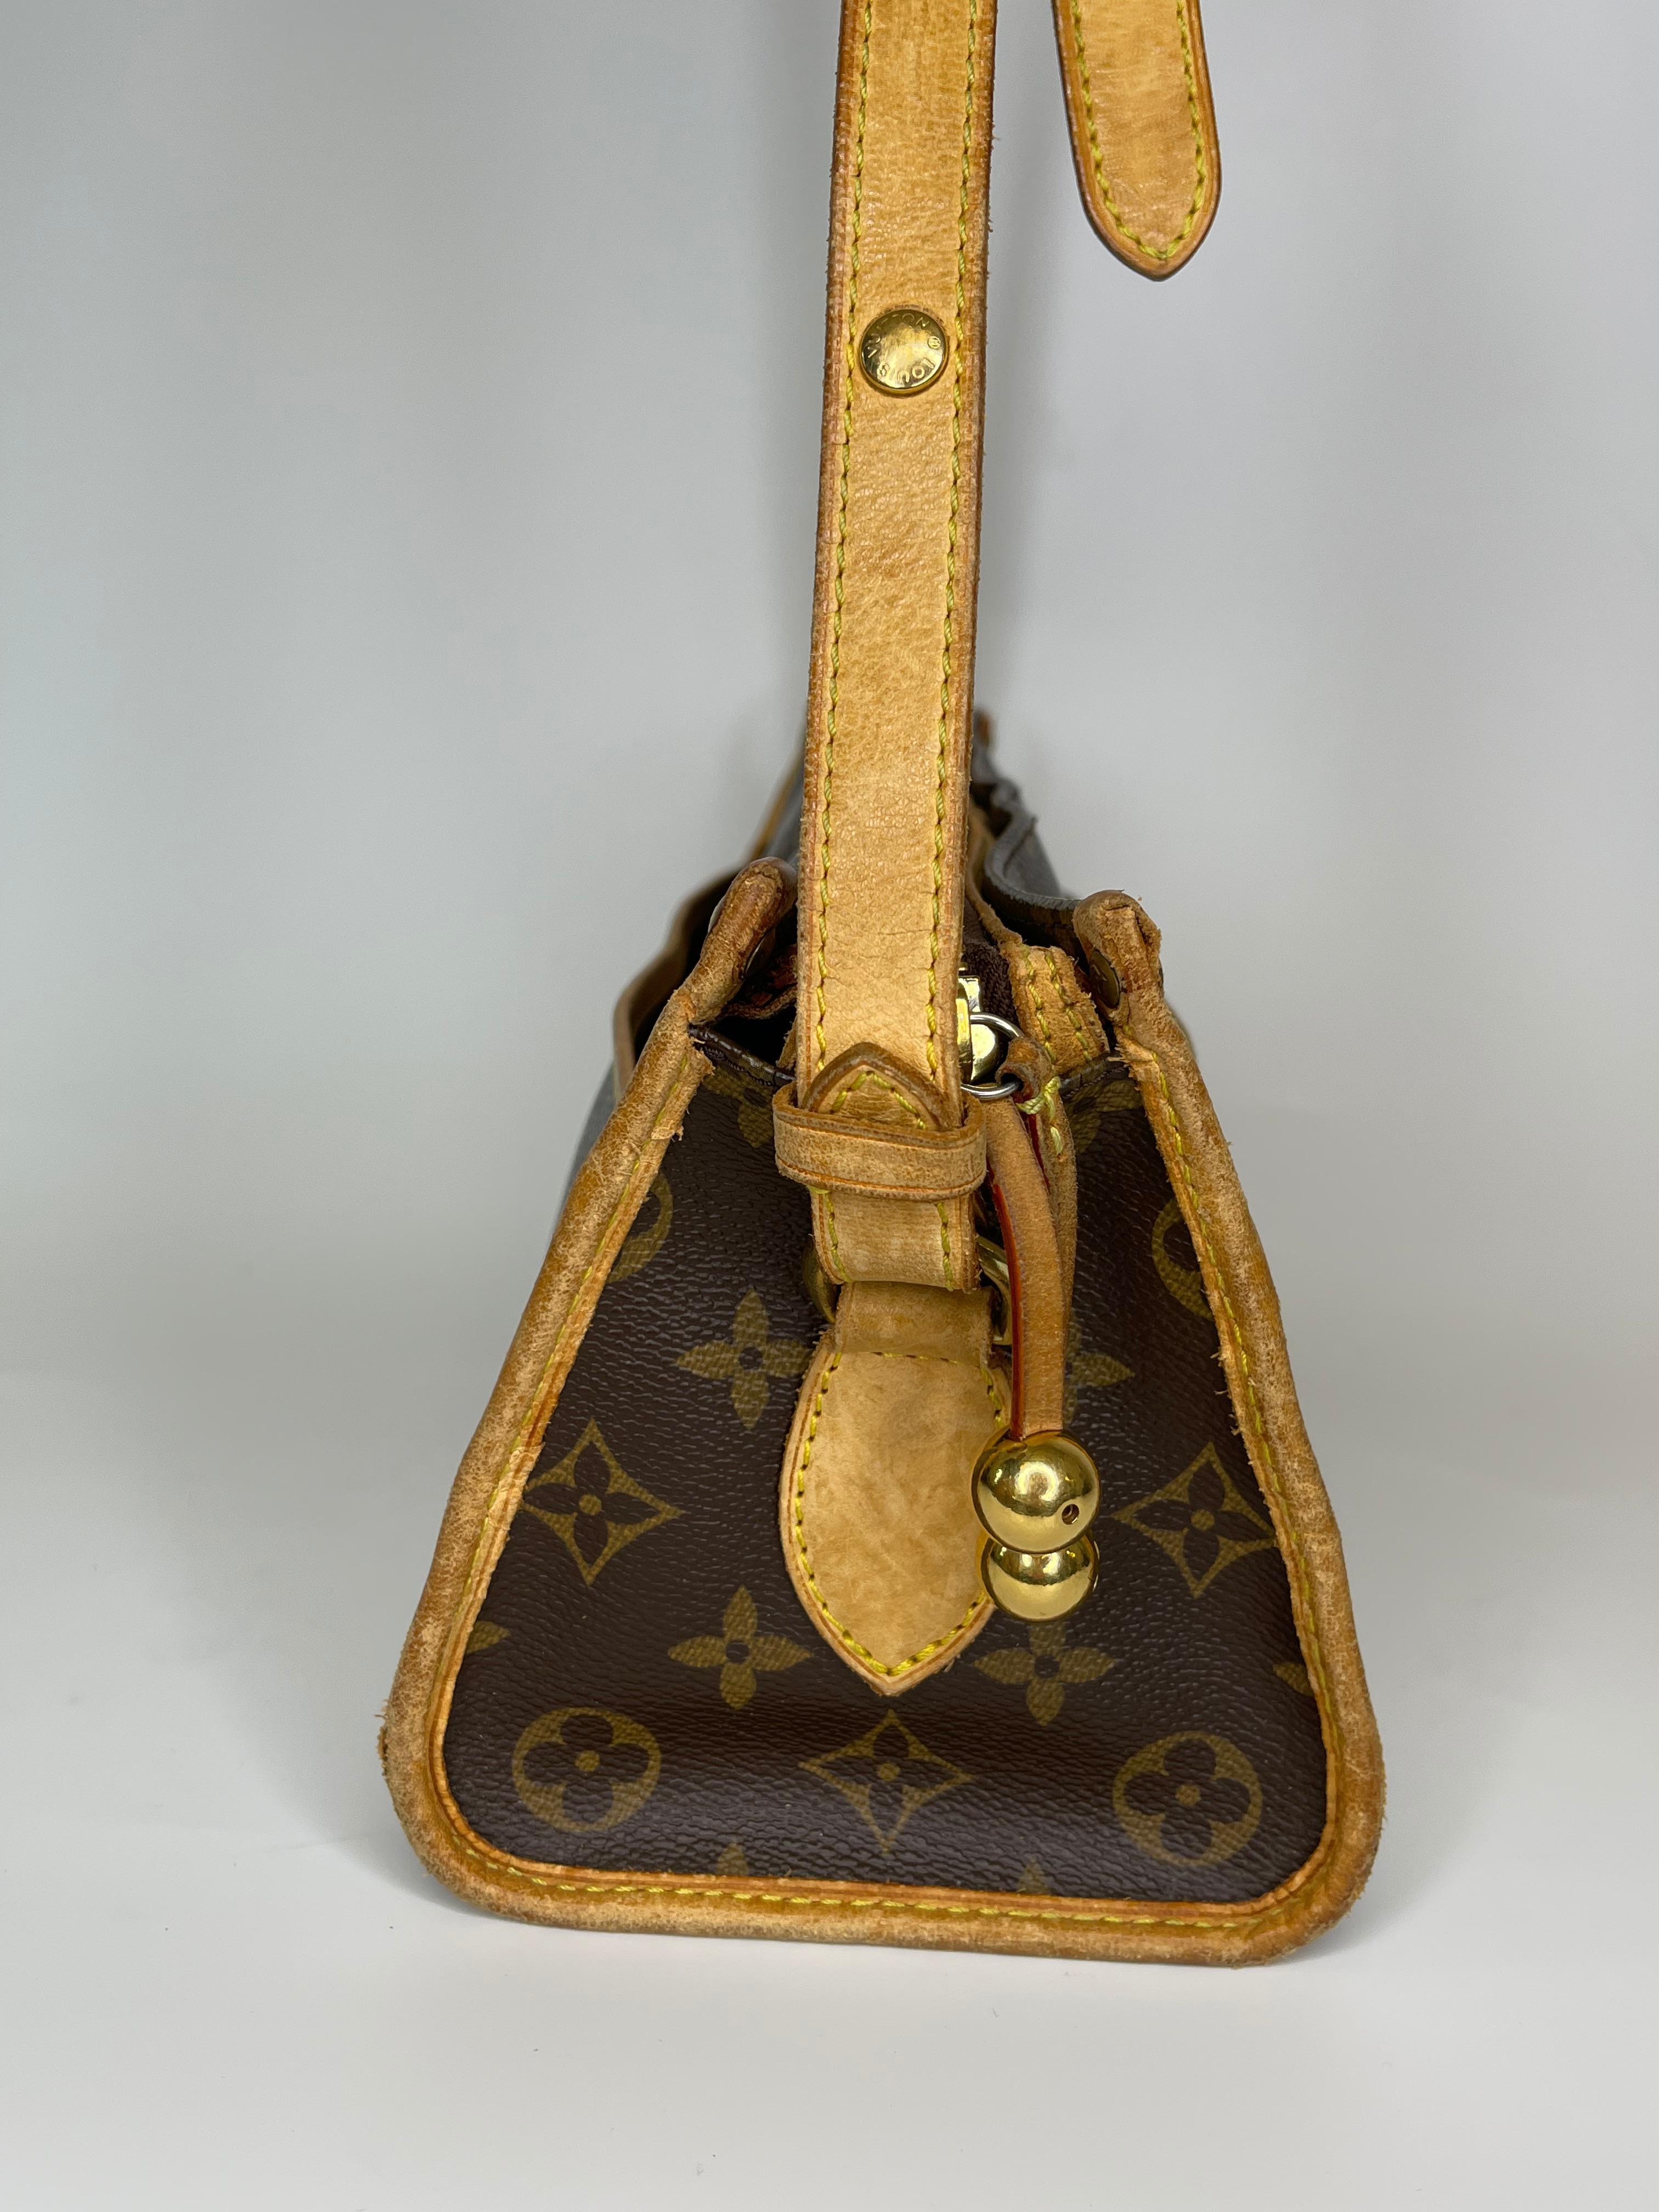 This iconic Louis Vuitton Monogram Popincourt Long Crossbody/Shoulder Bag features a traditional monogram canvas trimmed with vechetta leather with a total of four slip pockets on the exterior, vachetta shoulder strap adjustable allowing the bag to